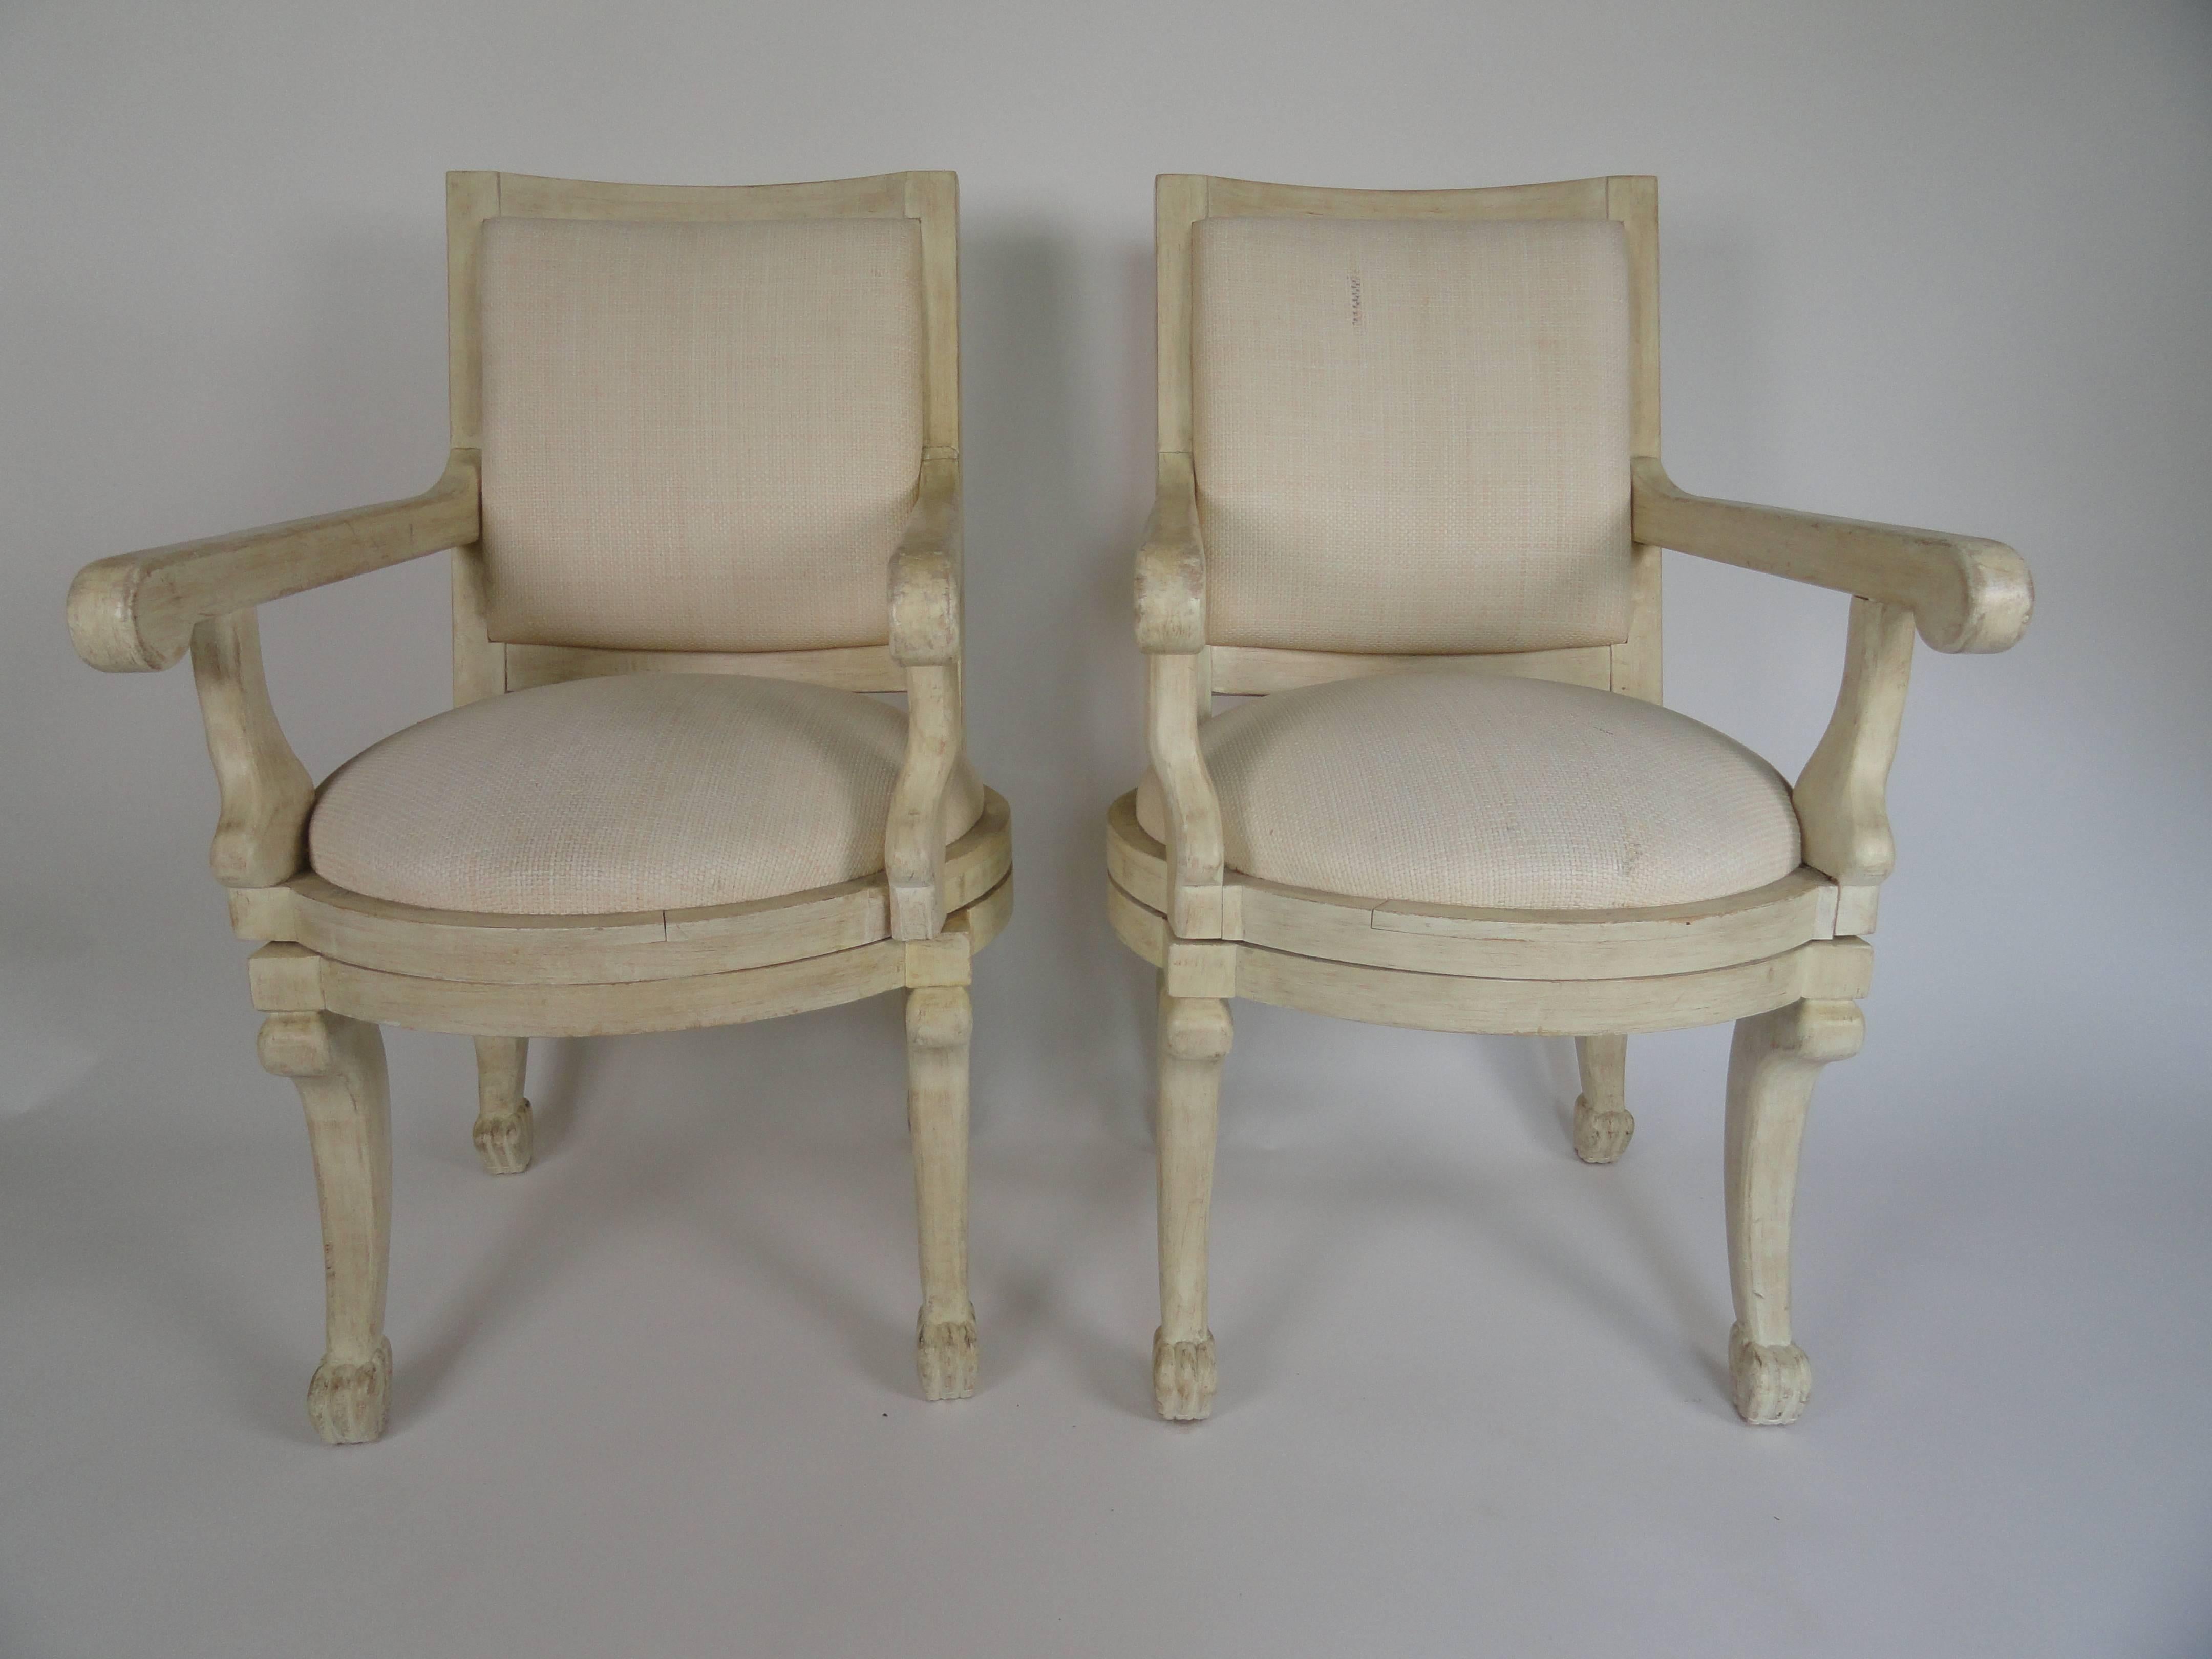 Pair of swivel armchairs in the manner of John Dickinson, sculpted wood. Finish varies. It is smooth on the back but rough, textured on the arms. Upholstered in natural raffia, which shows some natural flaws.